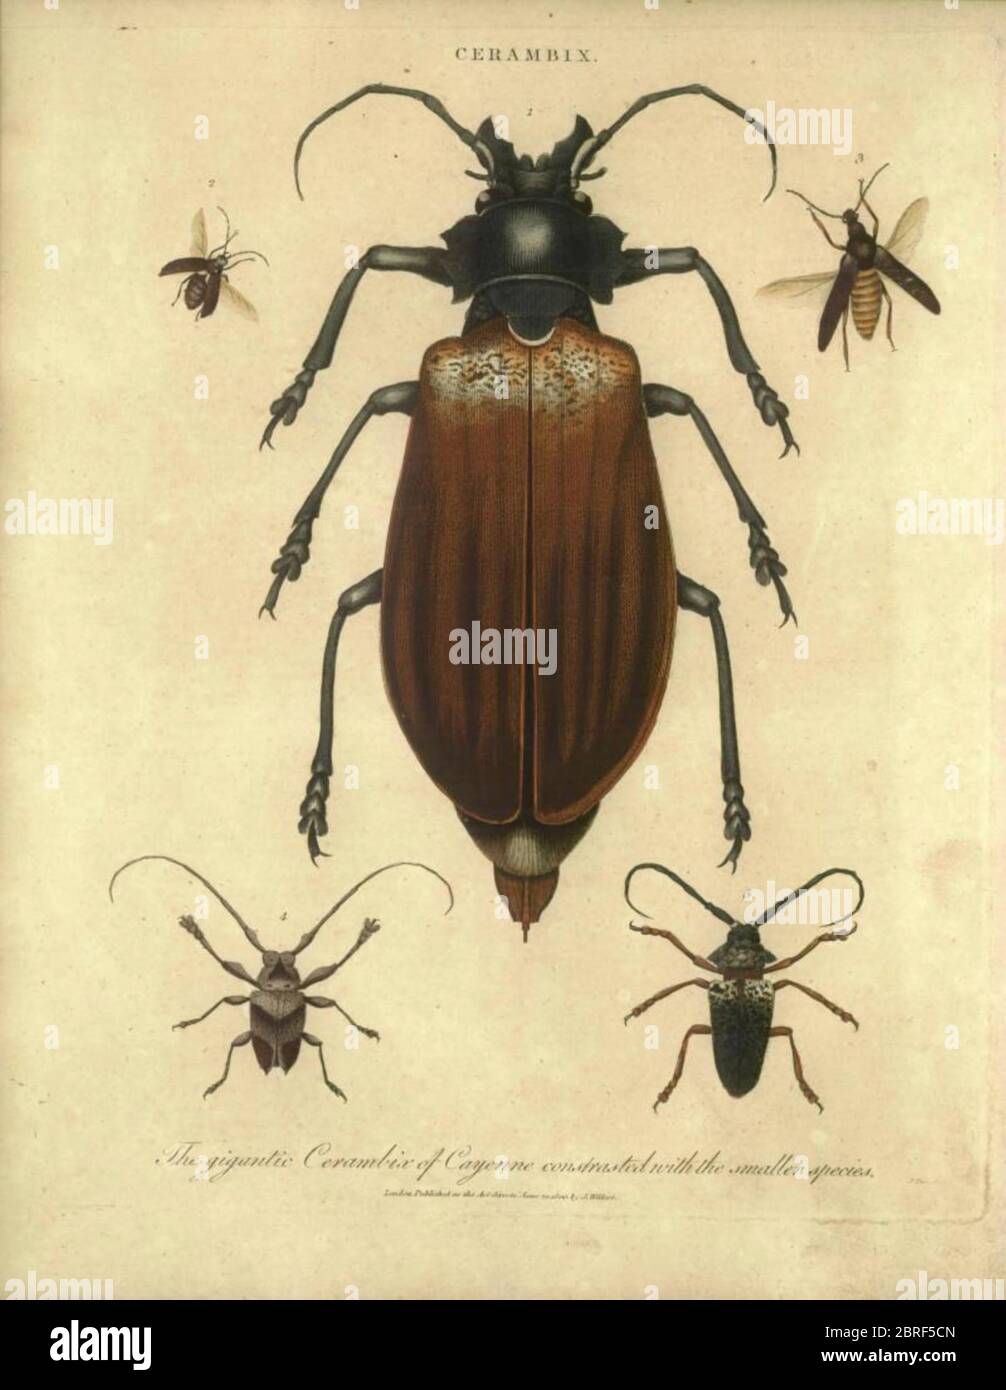 Cerambyx [Here as Cerambix] is a genus of beetles in the family Cerambycidae (longhorn beetles). They are commonly known as capricorn beetles. Handcolored copperplate engraving From the Encyclopaedia Londinensis or, Universal dictionary of arts, sciences, and literature; Volume IV;  Edited by Wilkes, John. Published in London in 1810 Stock Photo